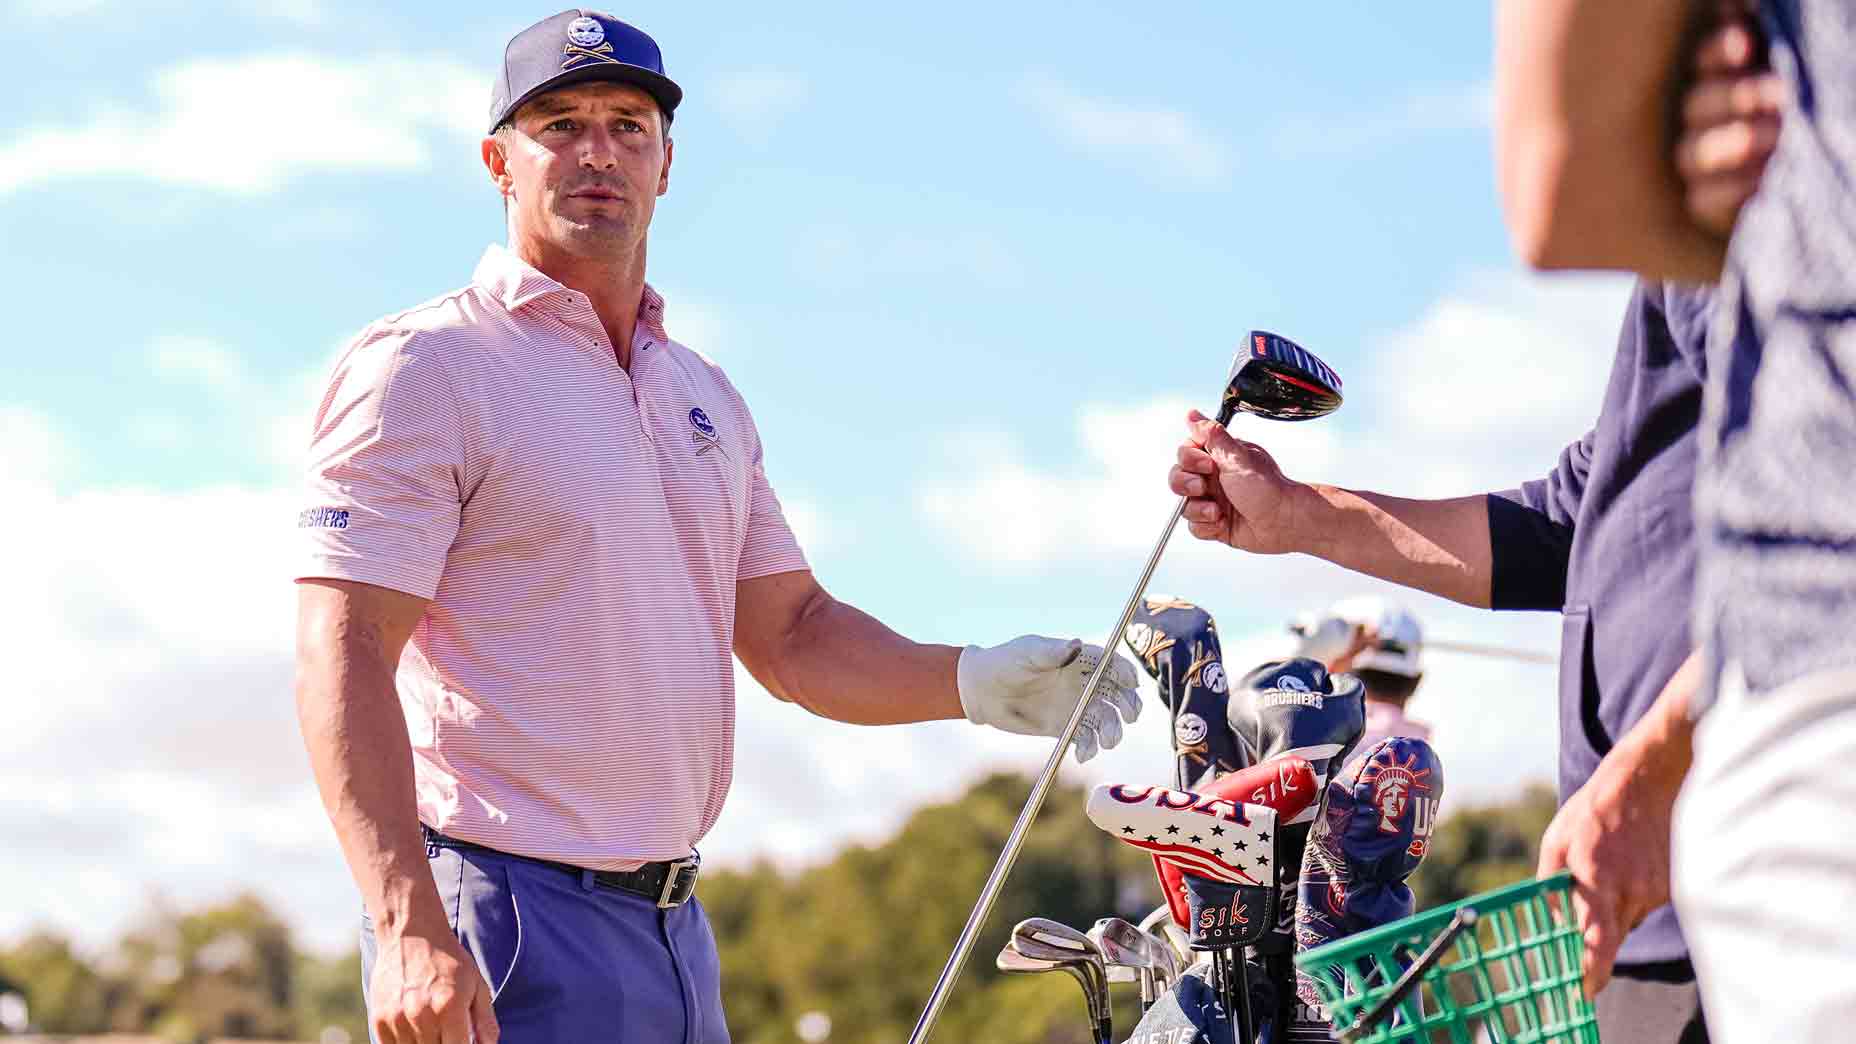 Recent U.S. Open champ Bryson DeChambeau might seem calm most of the time, but he revealed what stresses him out most on the range